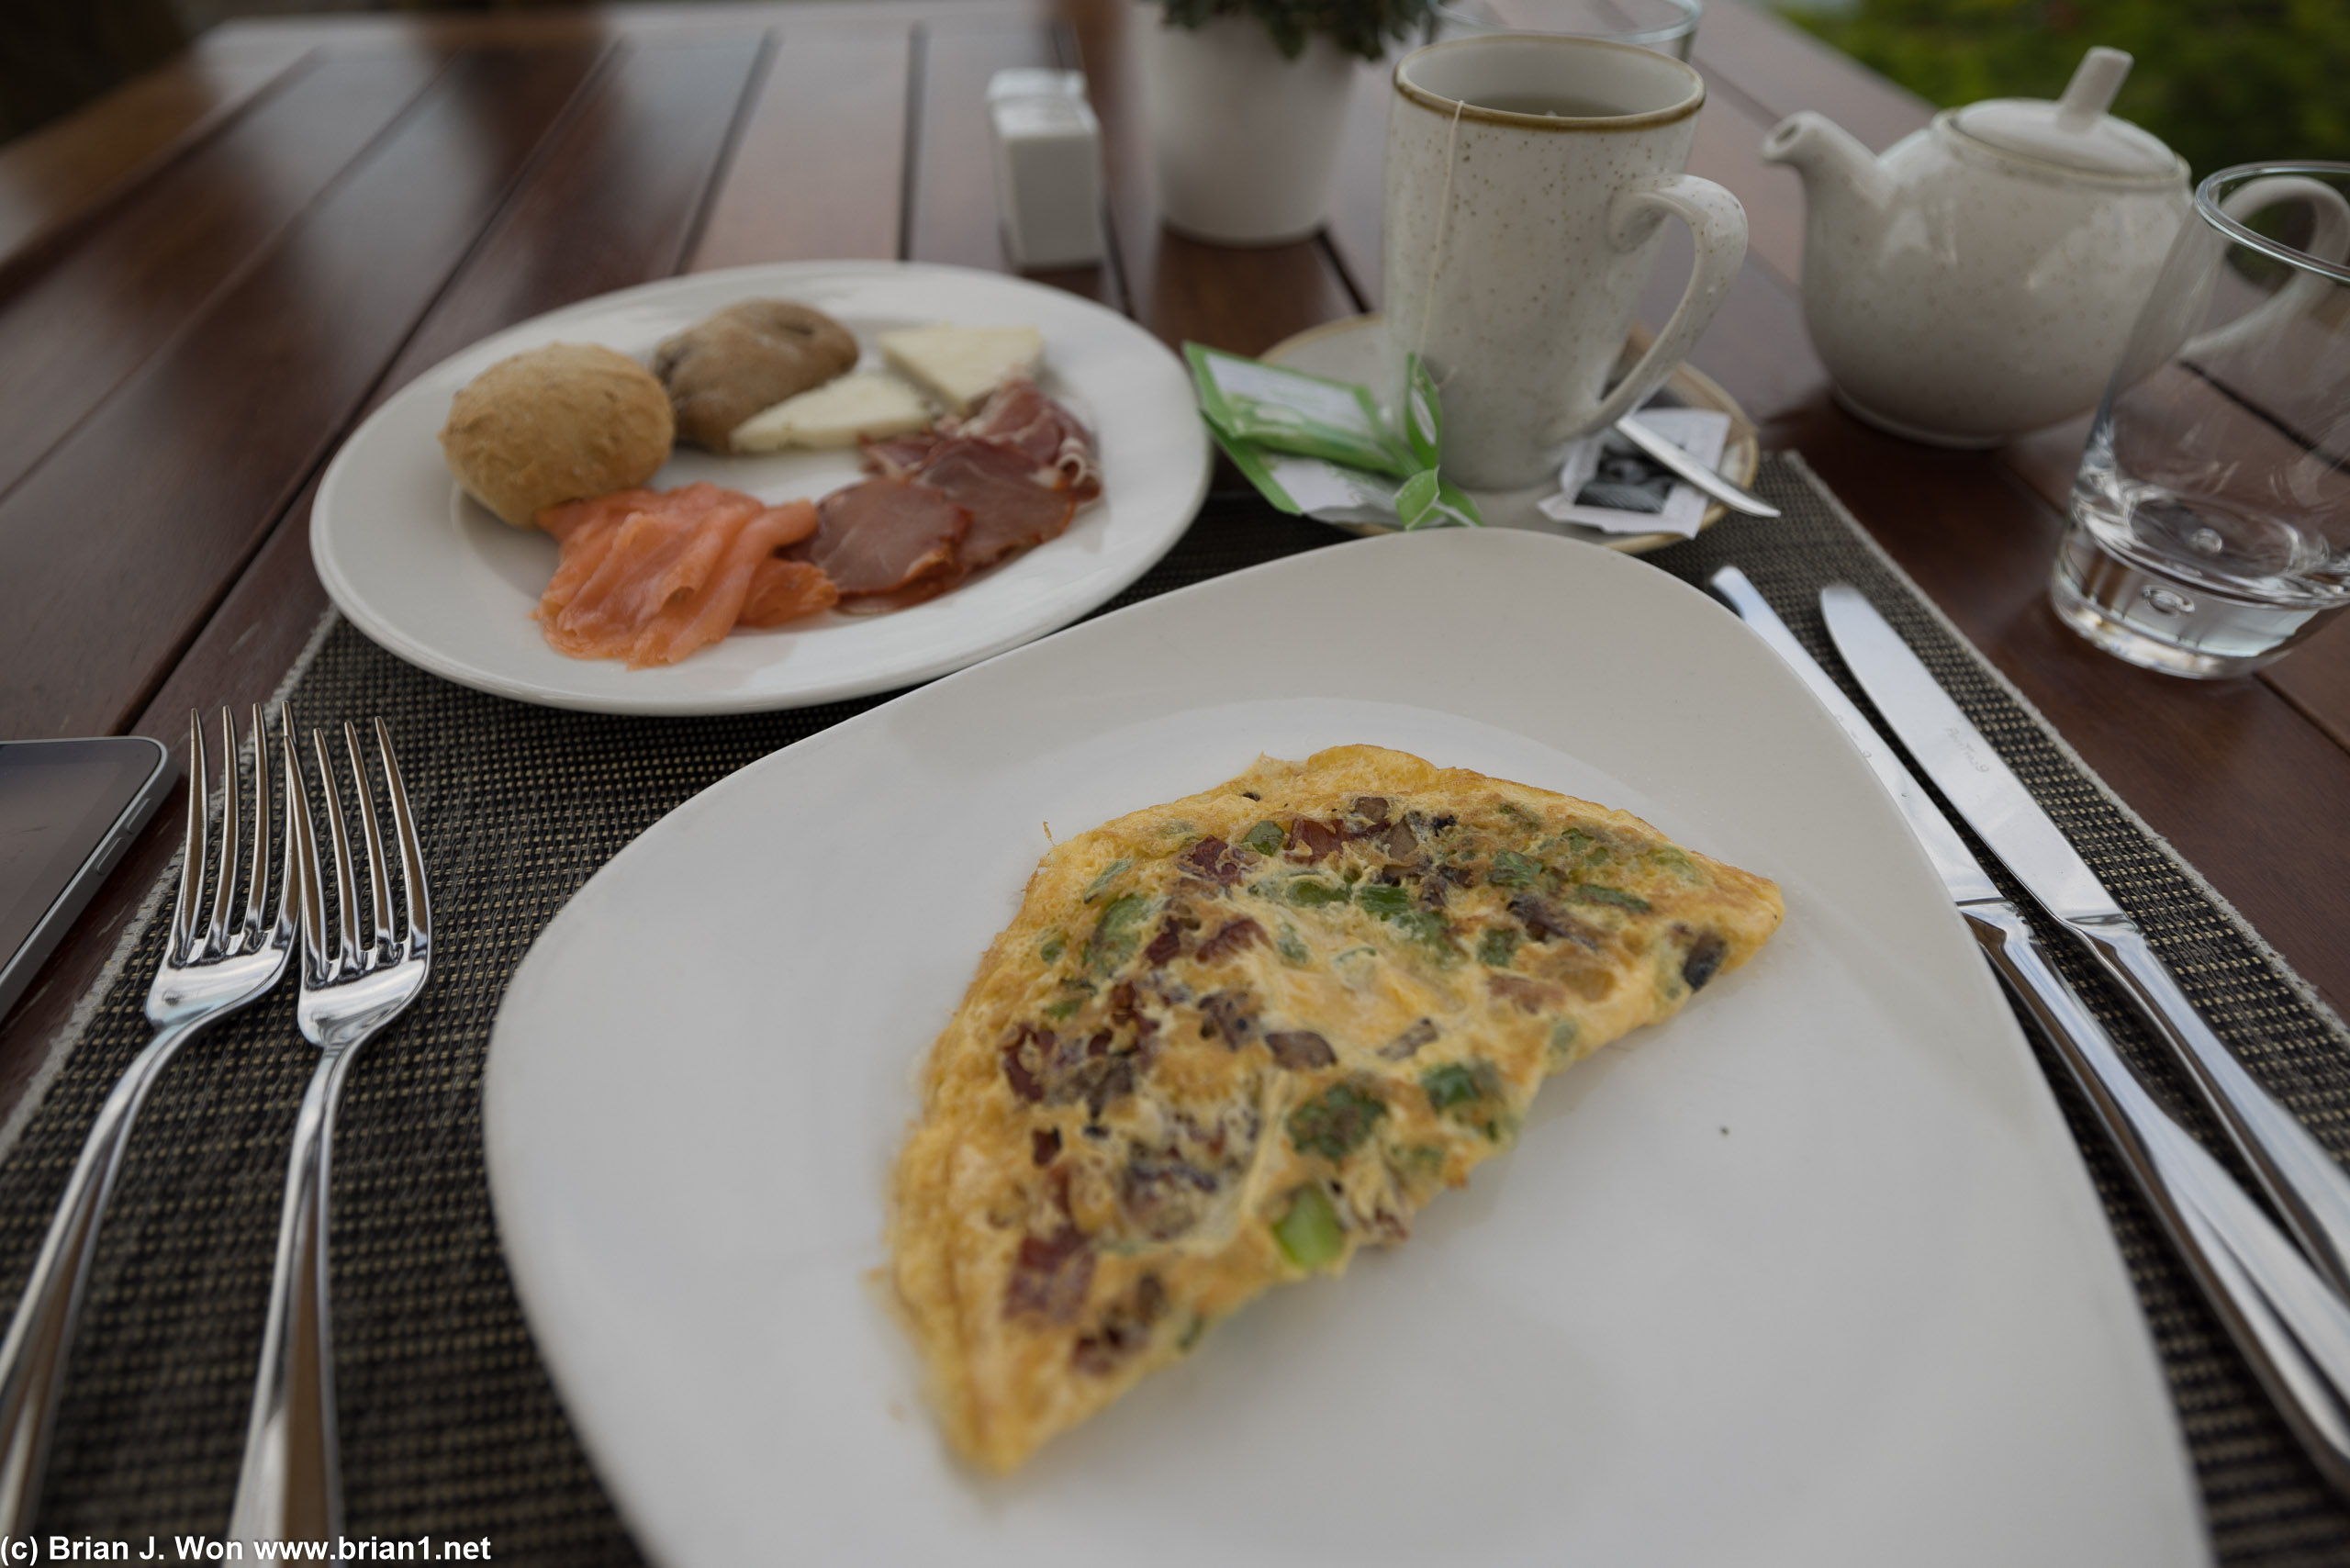 Made to order omelets.